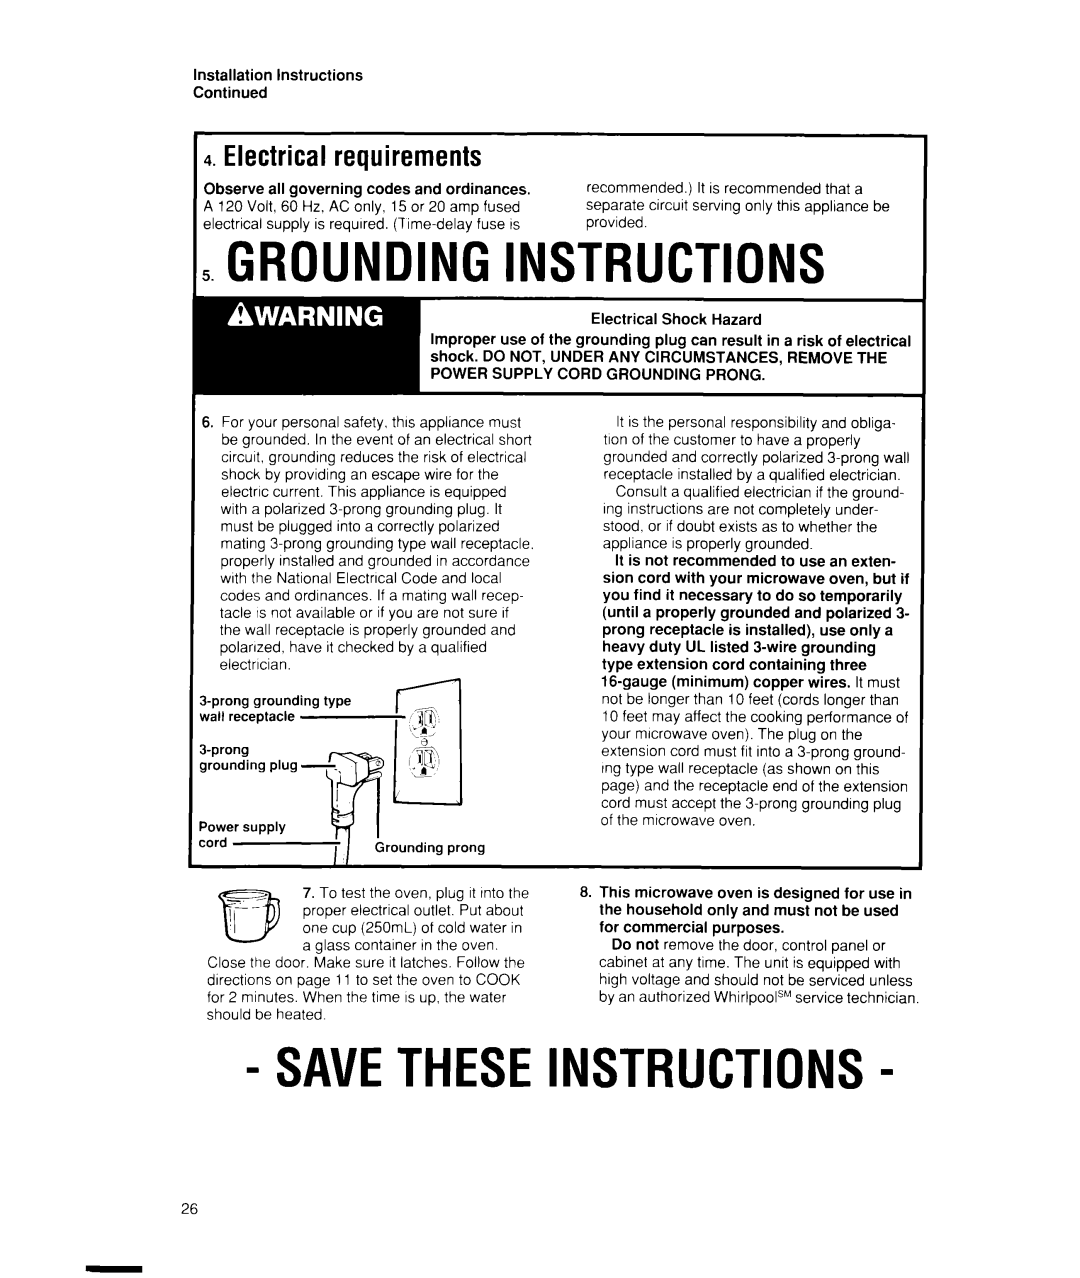 Whirlpool MW7400XW manual 5GROUNDING.INSTRUCTIONS, Electrical requirements, Savetheseinstructions 